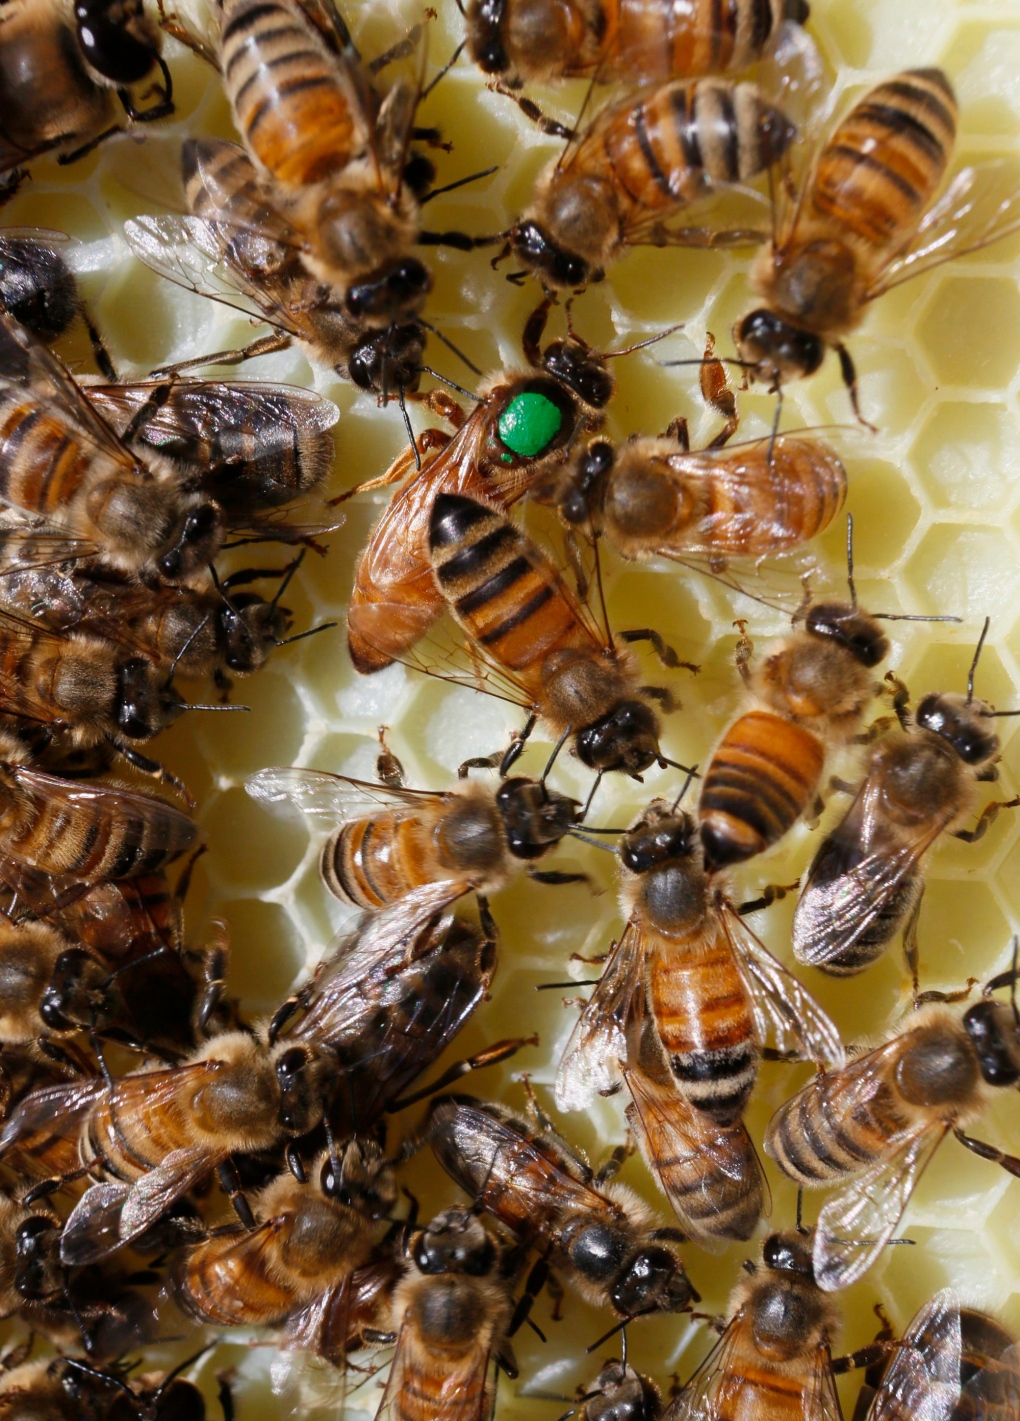 New York woman had 50,000 bees in her ceiling